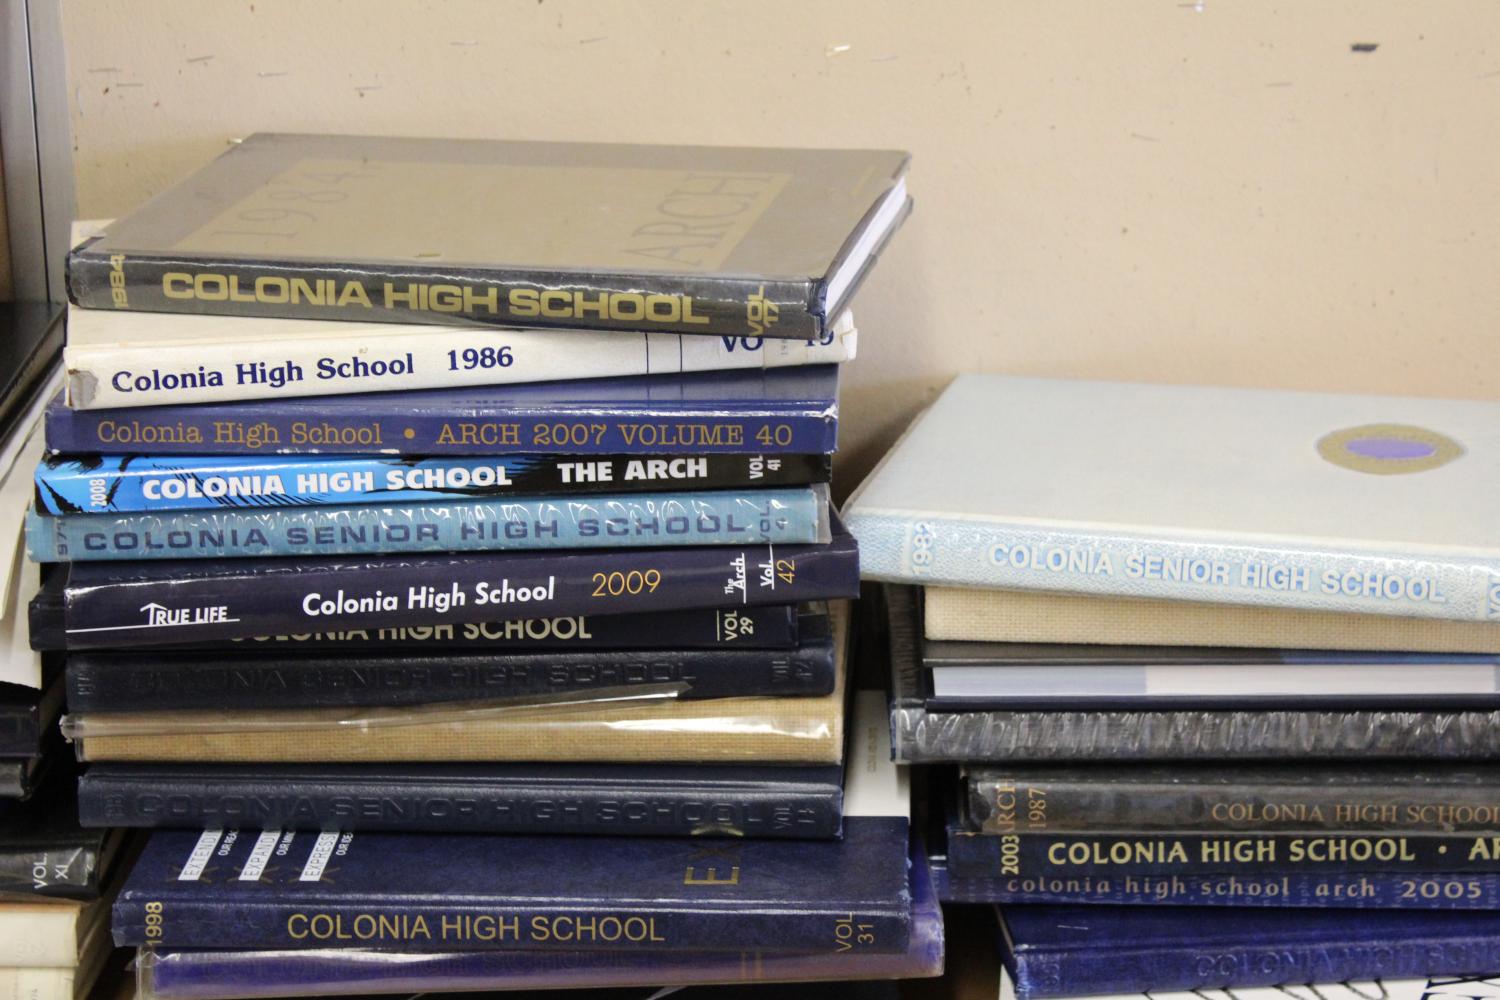 The previous Colonia High School yearbooks